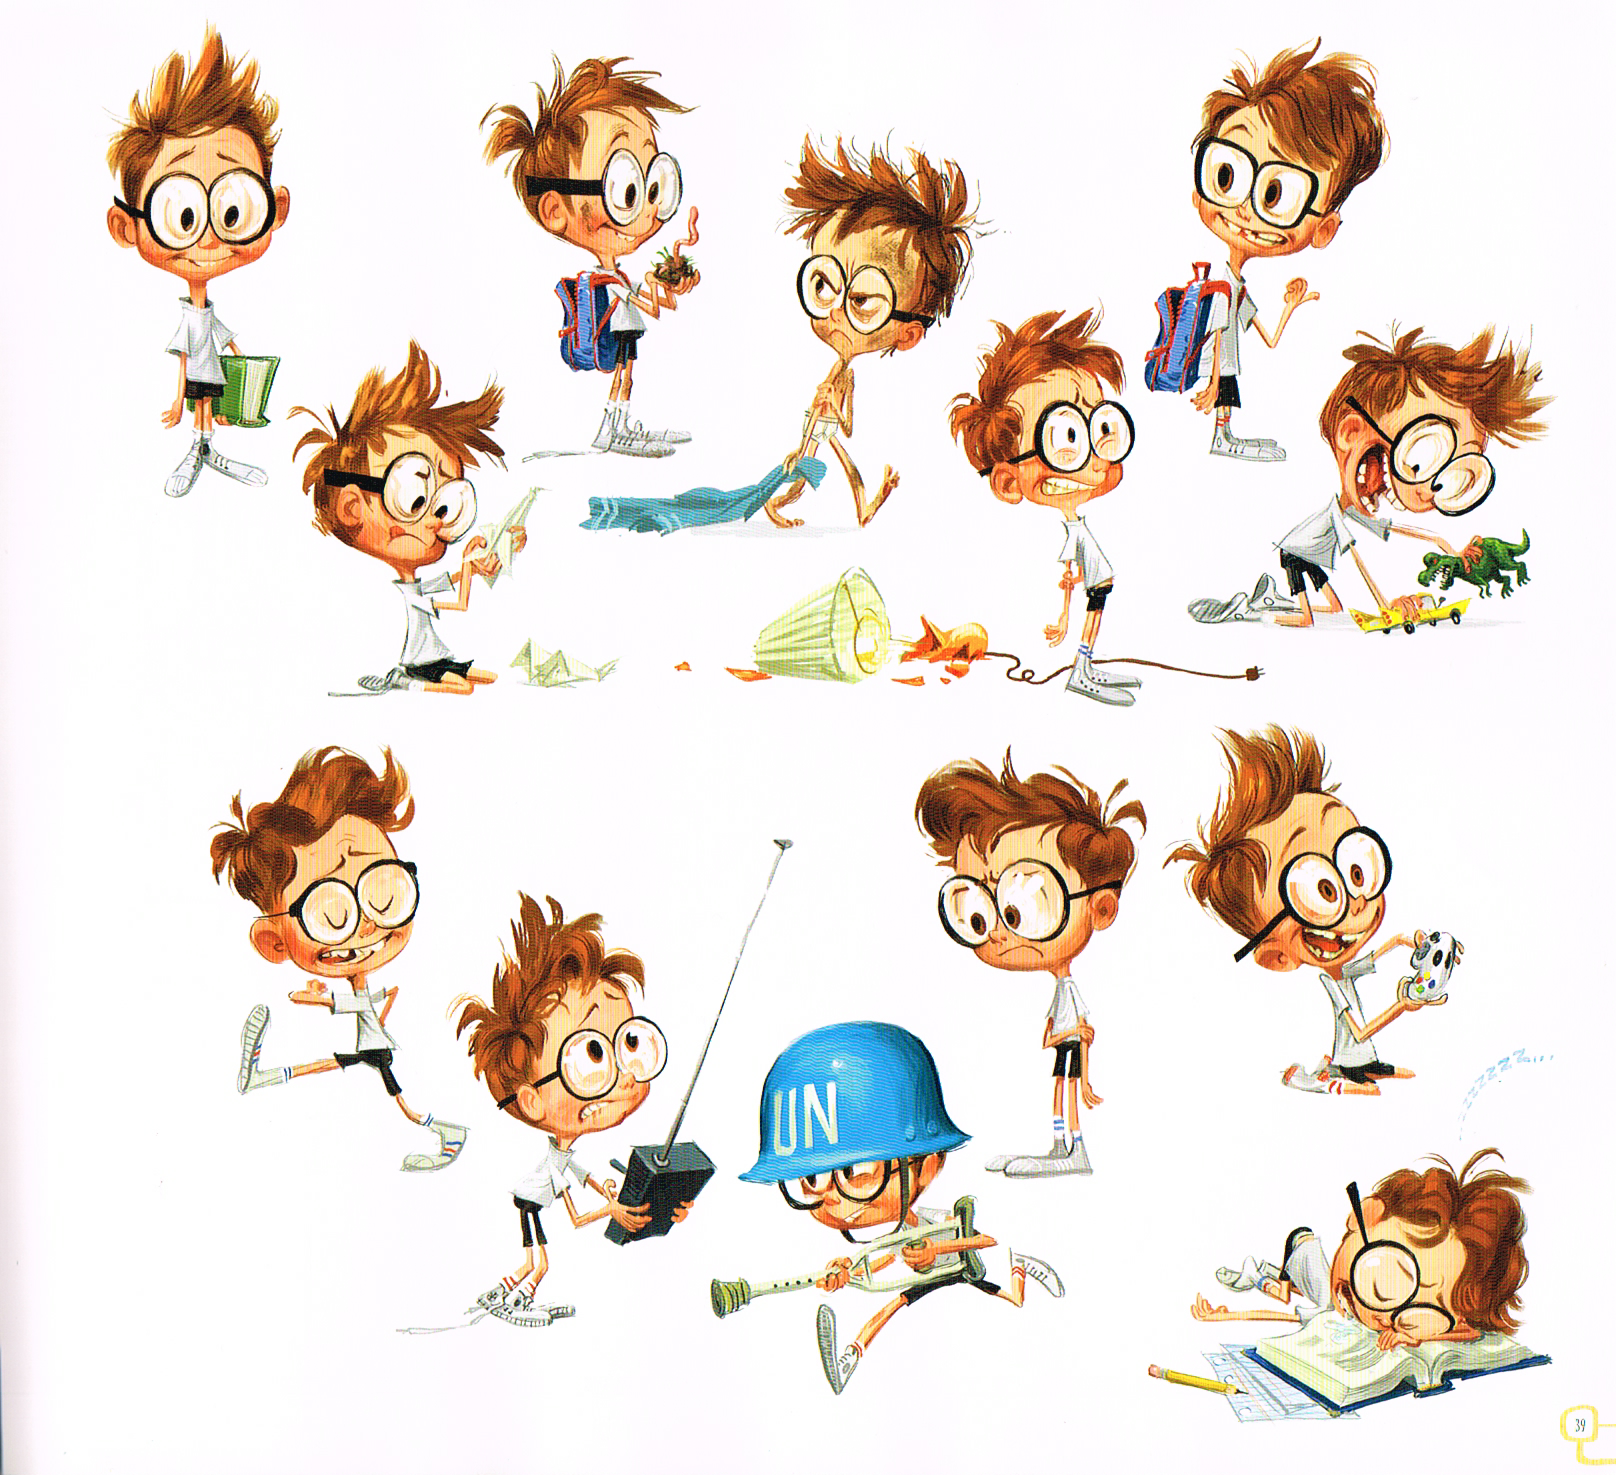 The Art of Mr.Peabody and Sherman pt.4 — Alex Escobar